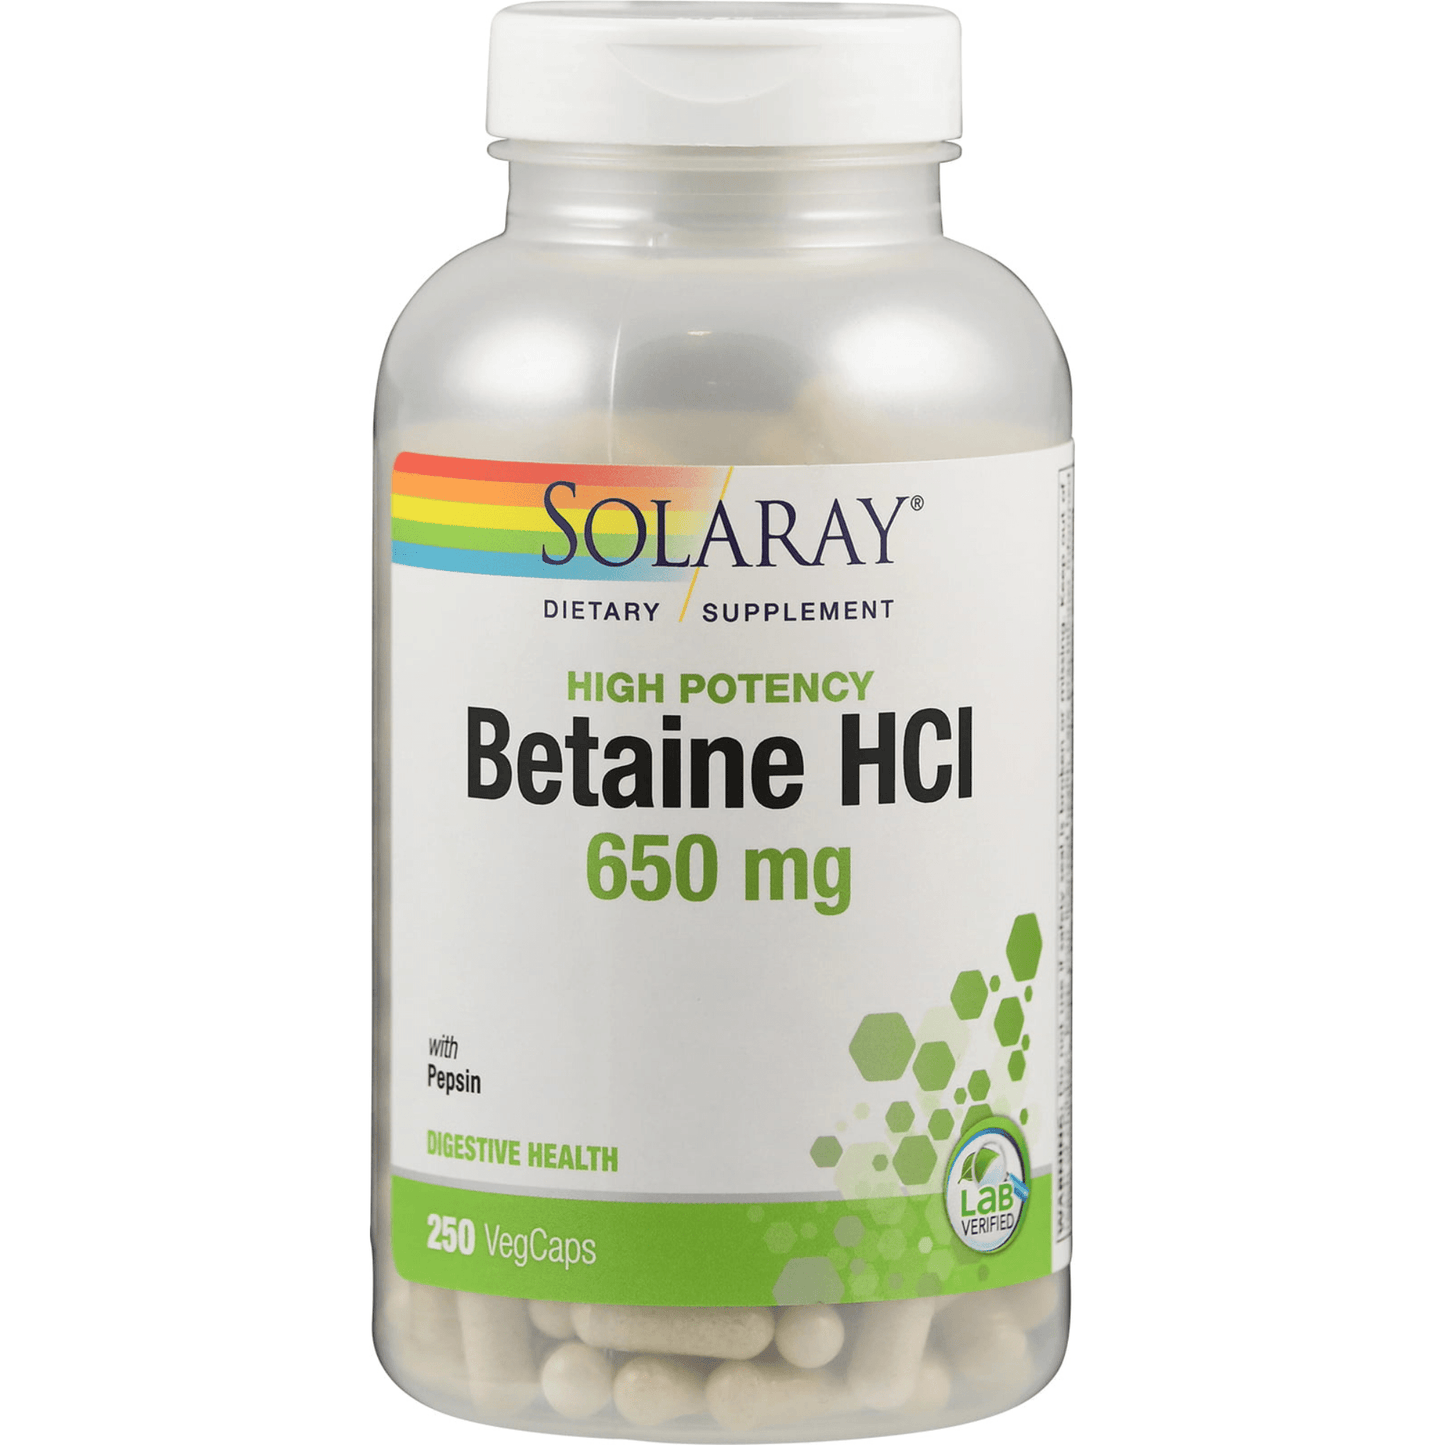 Primary Image of Betaine HCL with Pepsin 650 mg